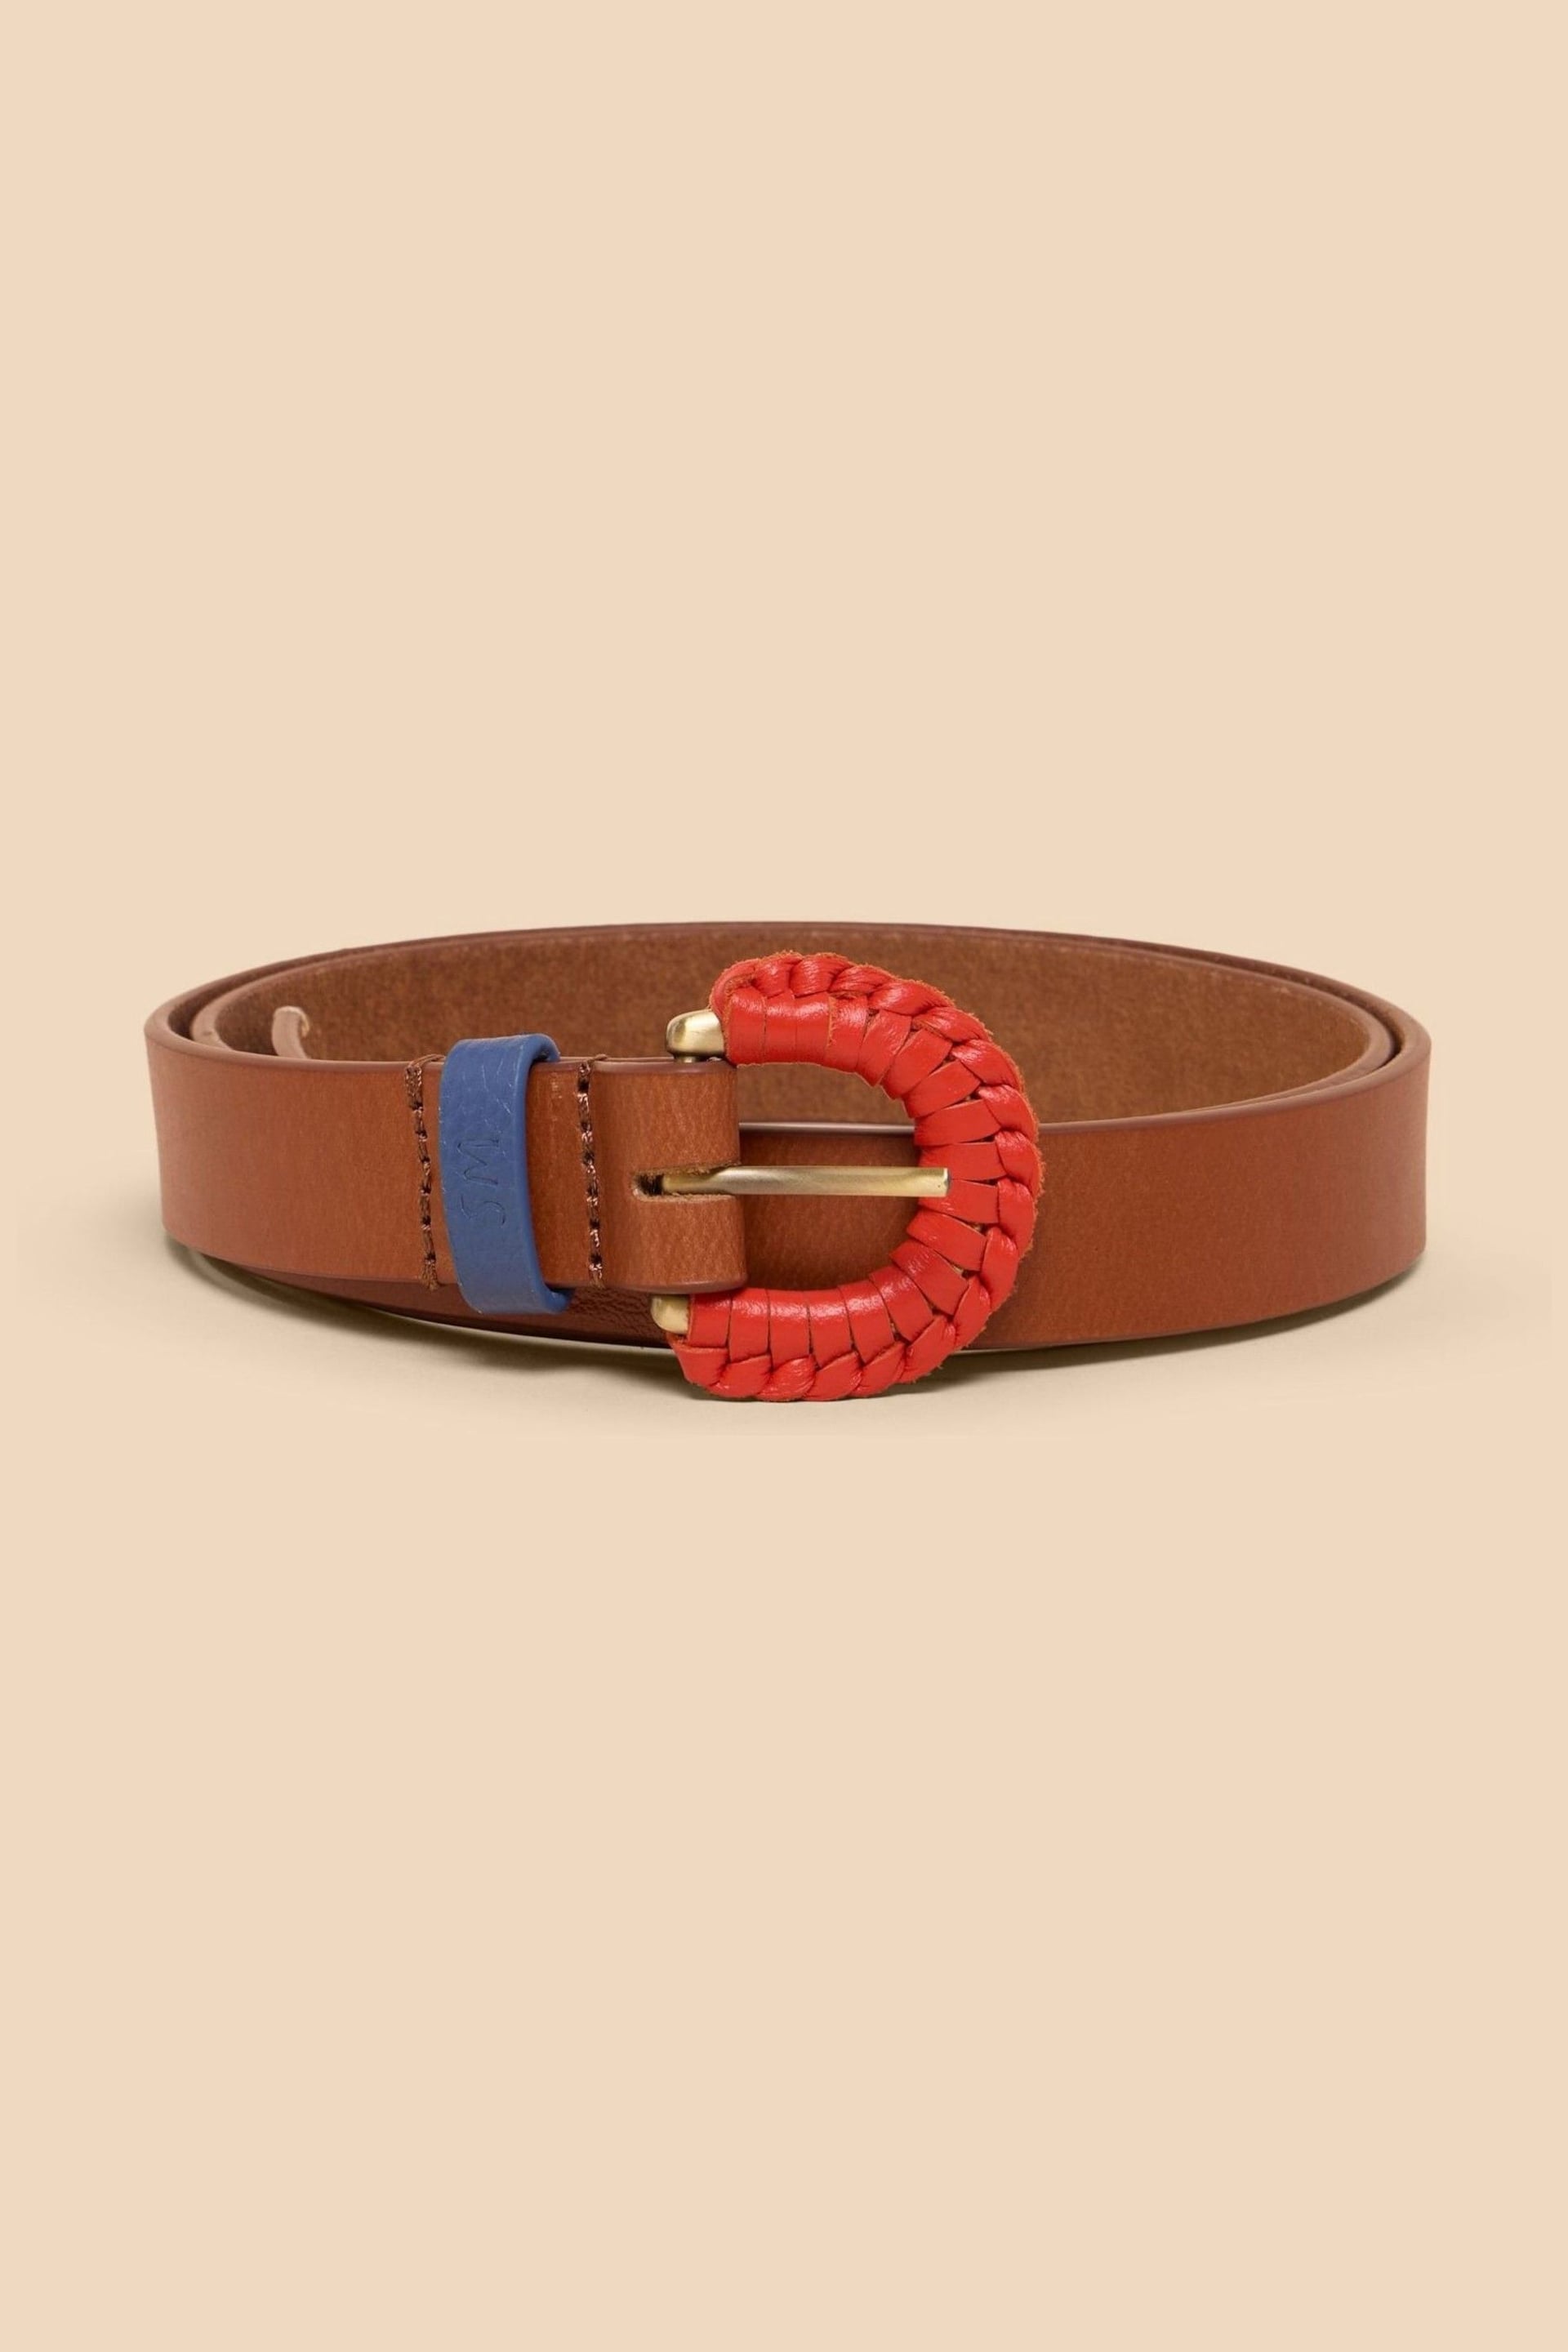 White Stuff Brown Woven Leather Buckle Belt - Image 1 of 3